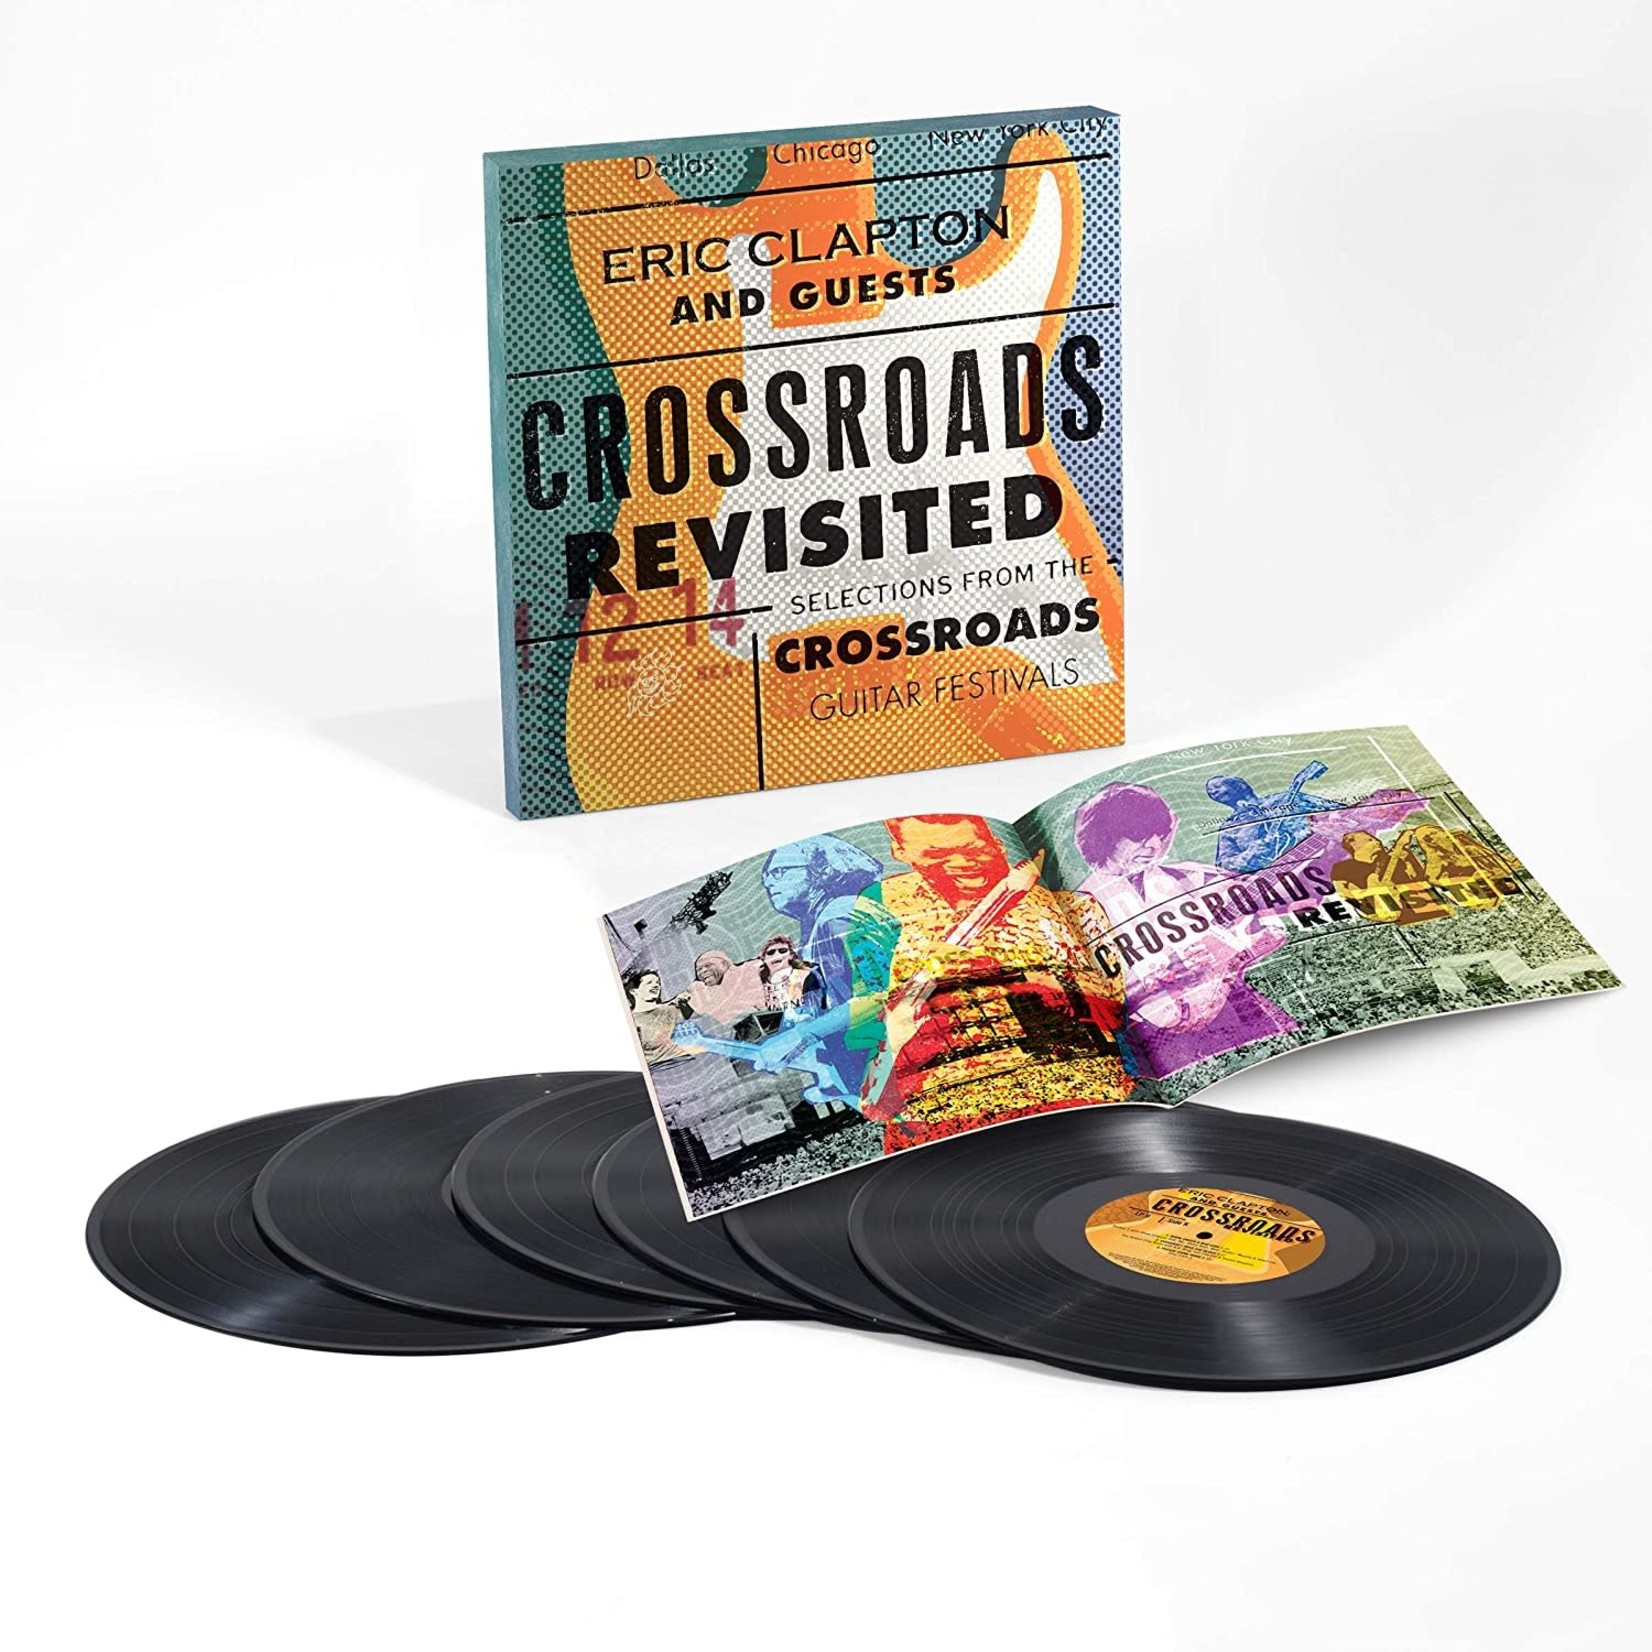 ERIC CLAPTON CROSSROADS REVISITED: SELECTIONS FROM THE GUITAR FESTIVALS (6 LP)